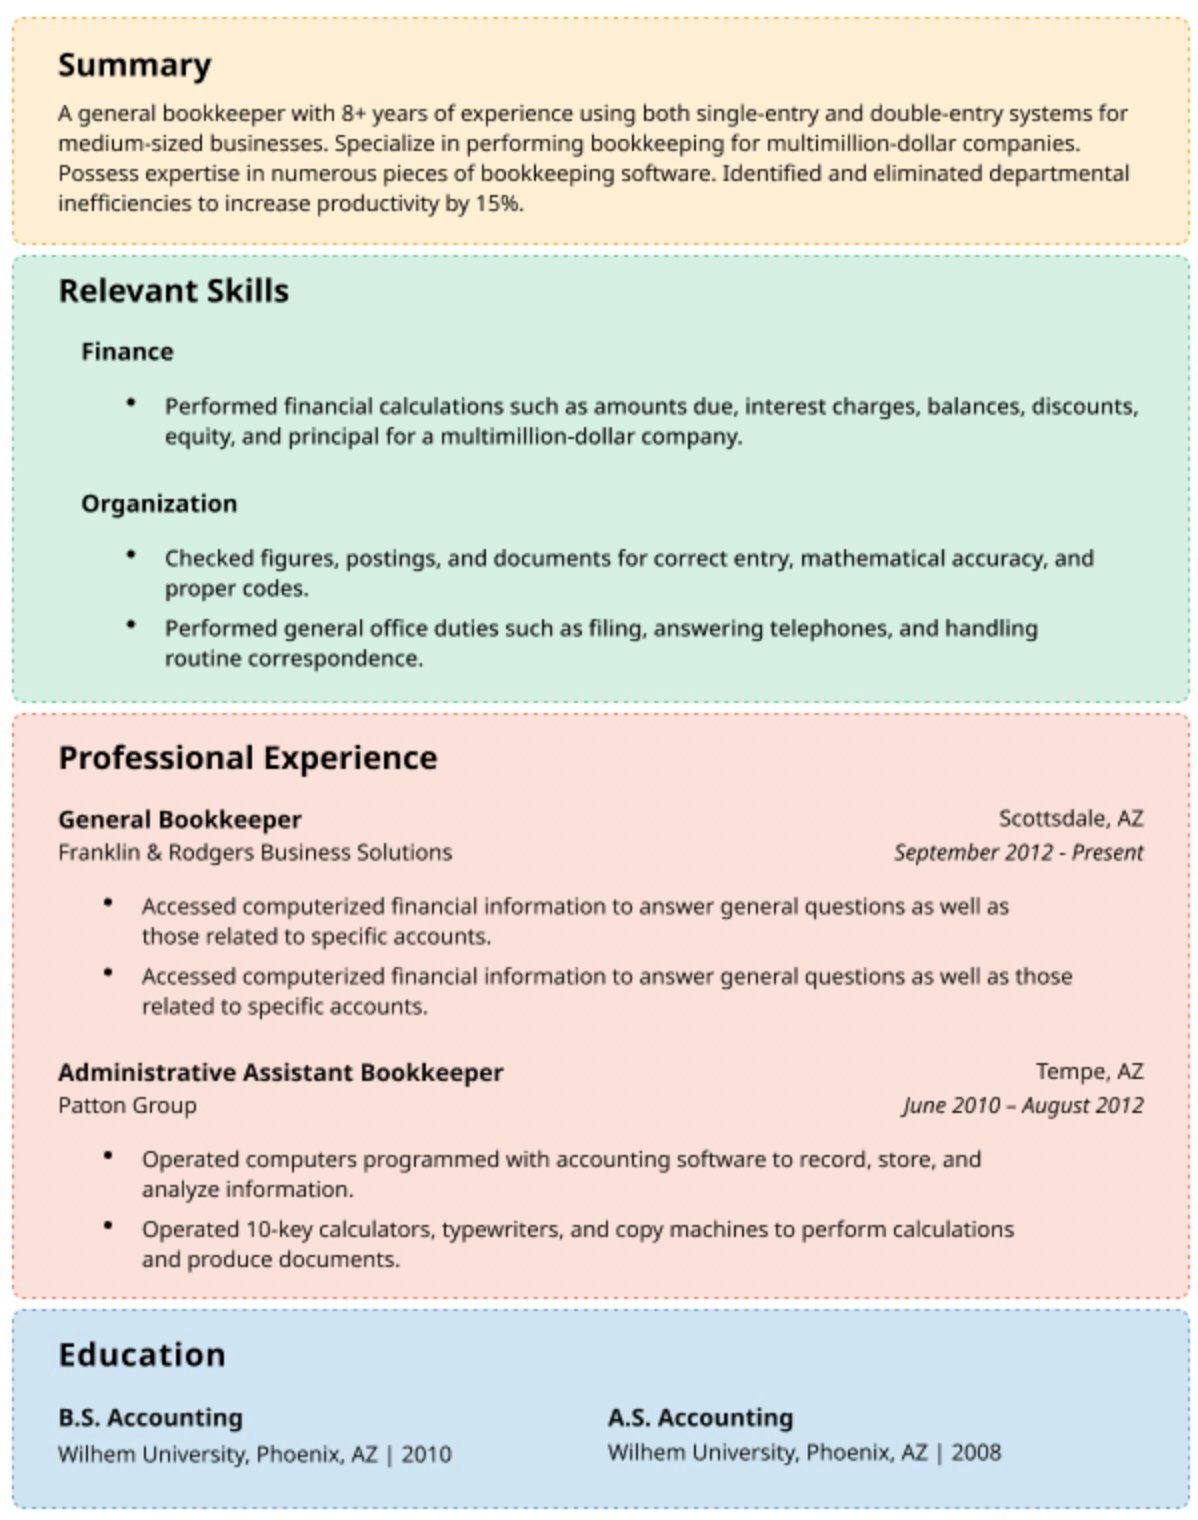 Example of a combination resume with colour-coded sections